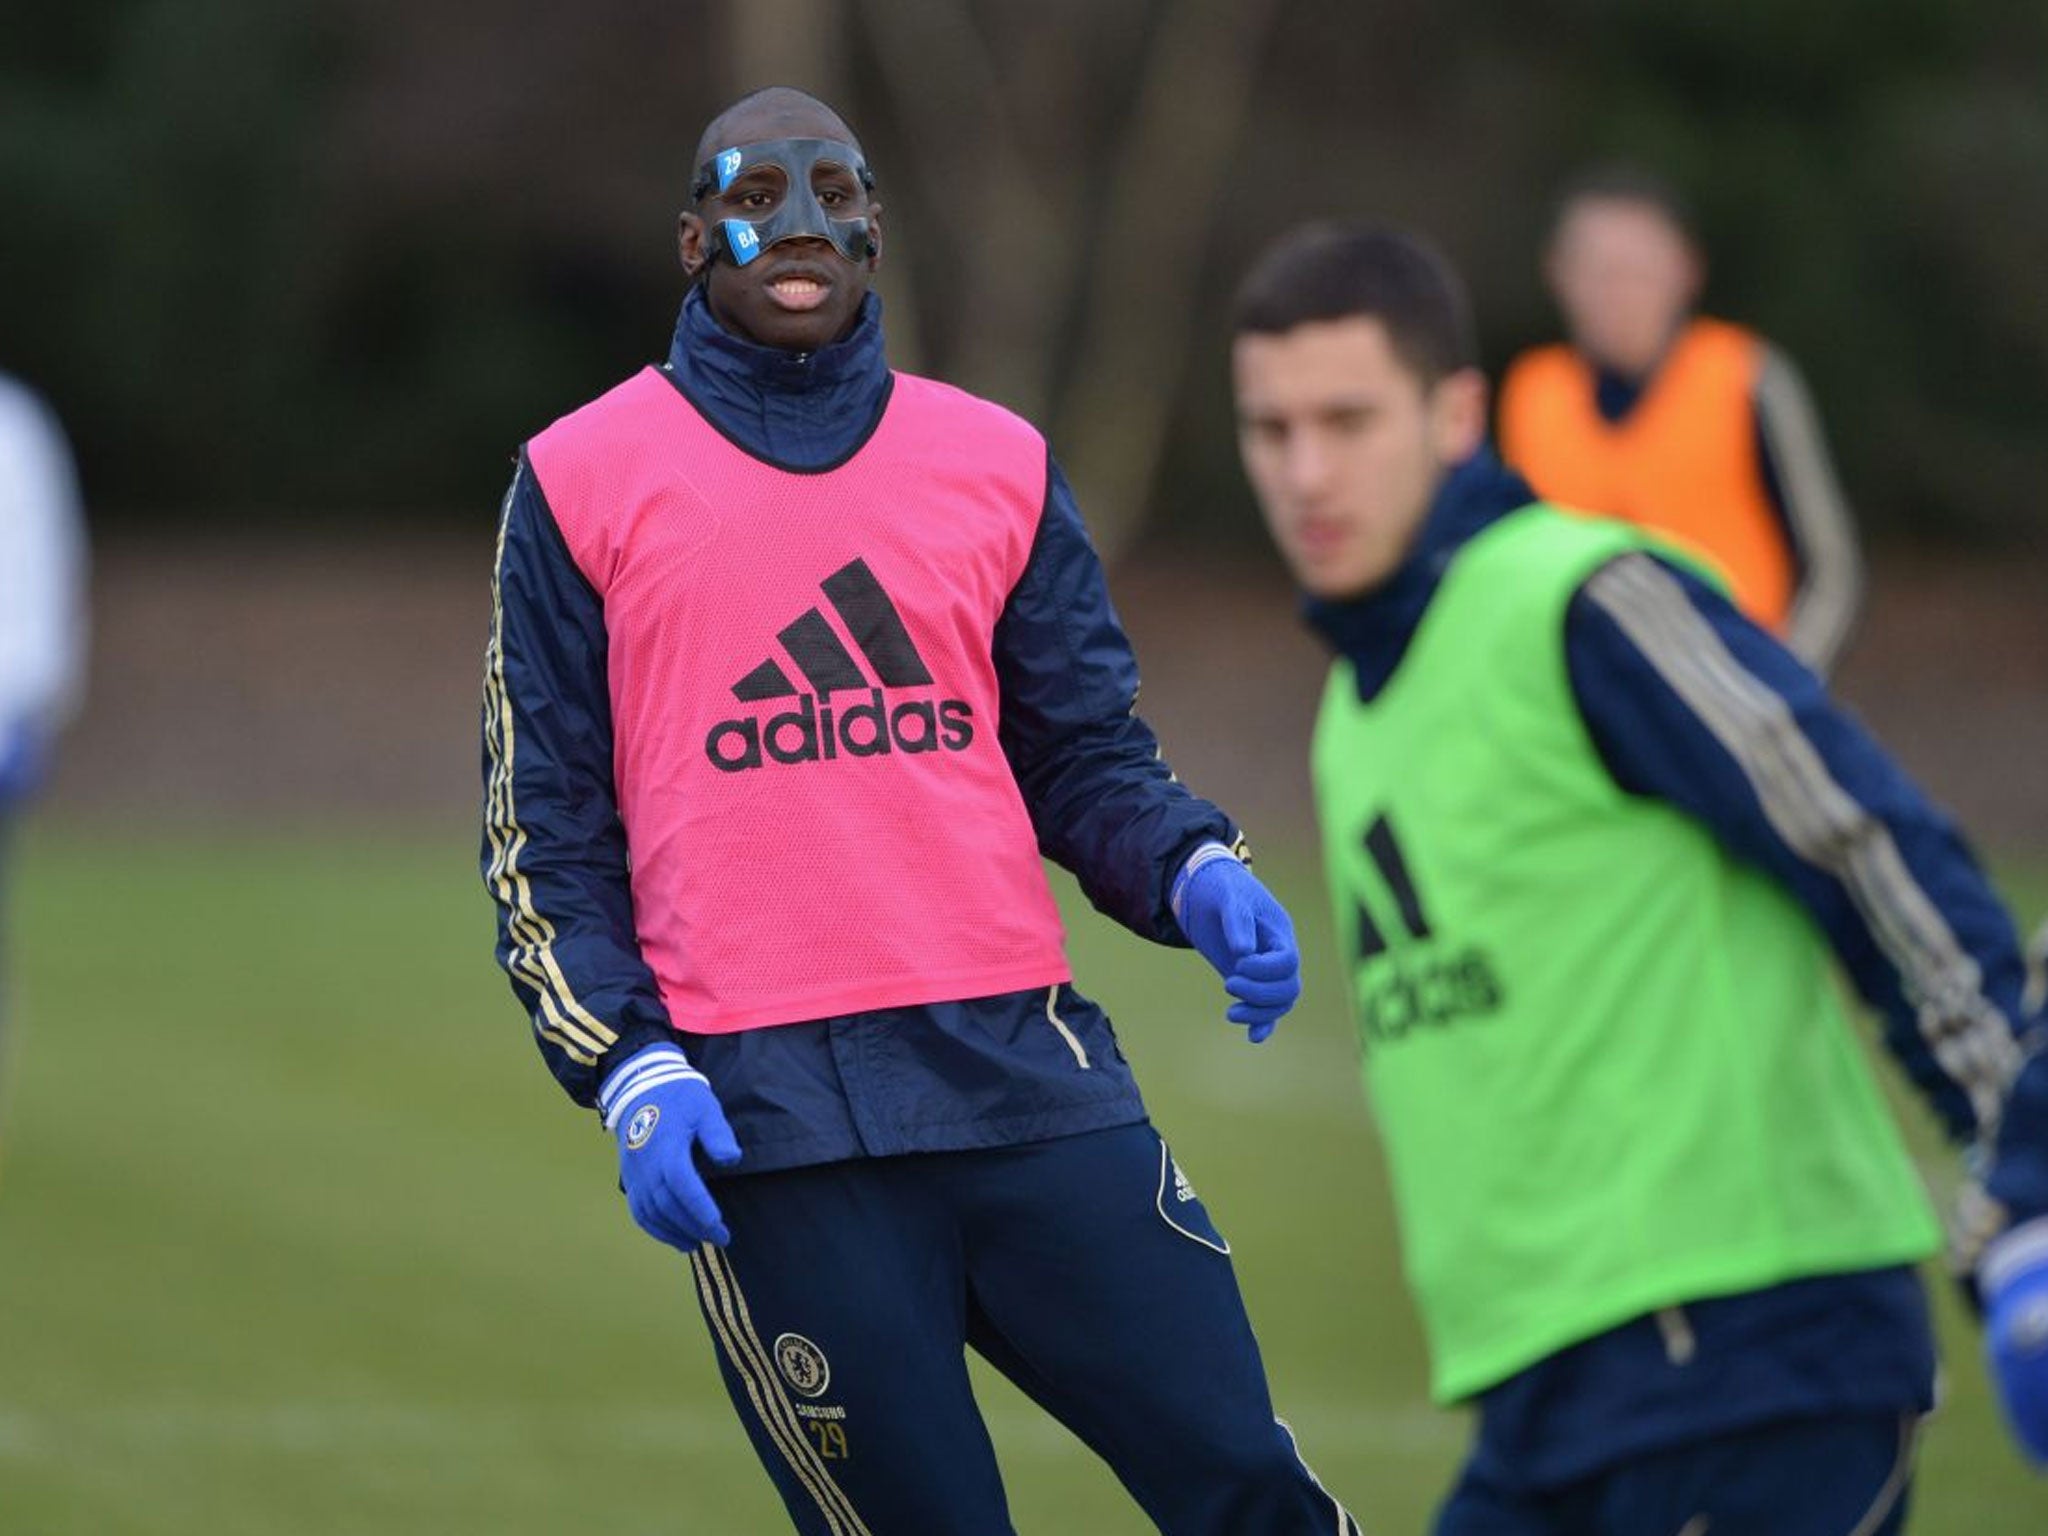 Demba Ba trains in his protective mask ahead of Chelsea's game with Wigan.